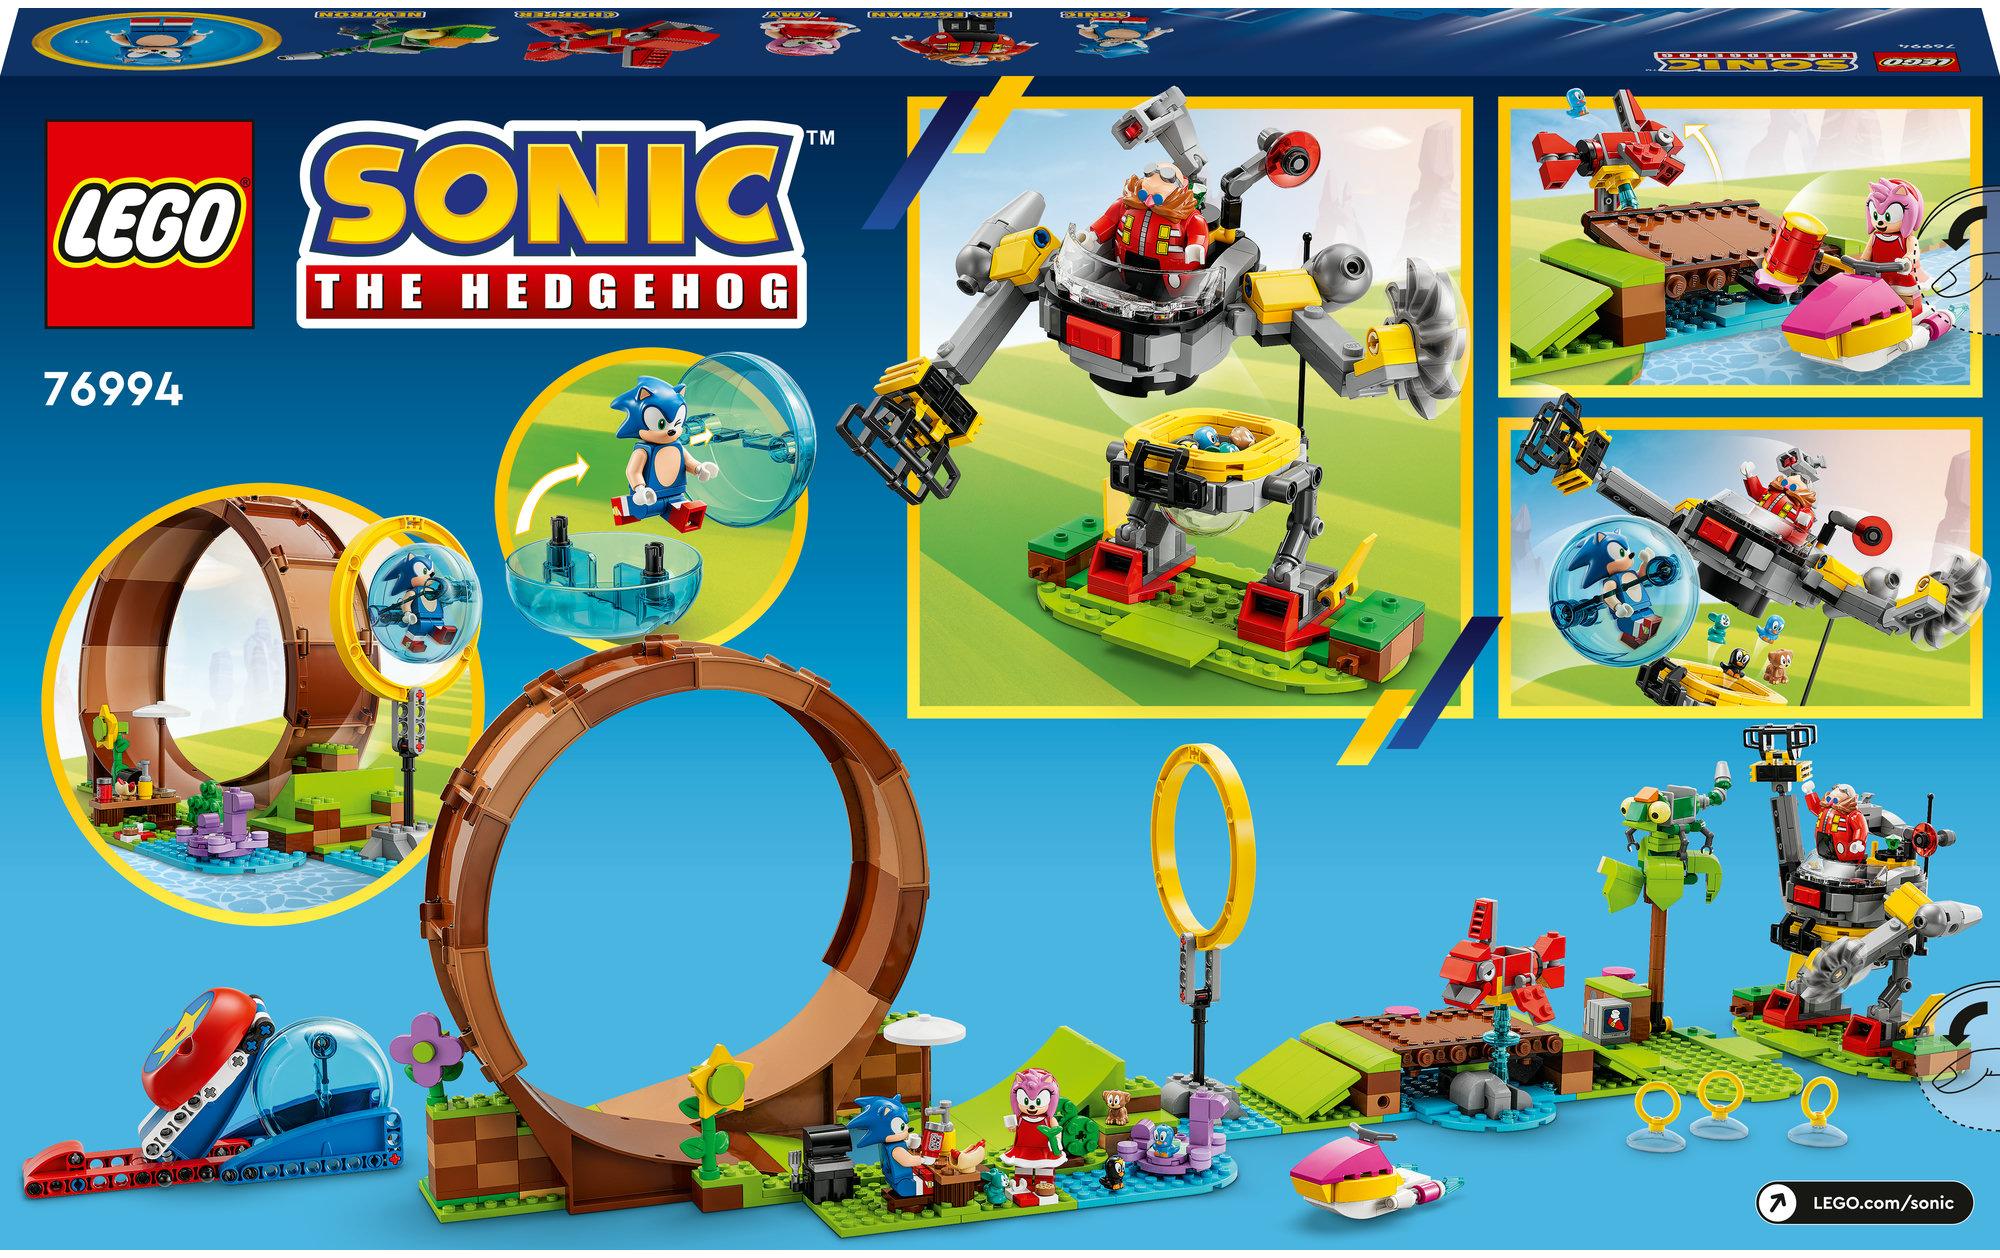 LEGO® Sonic Sonics Looping-Challenge in der Green Hill Zone 76994